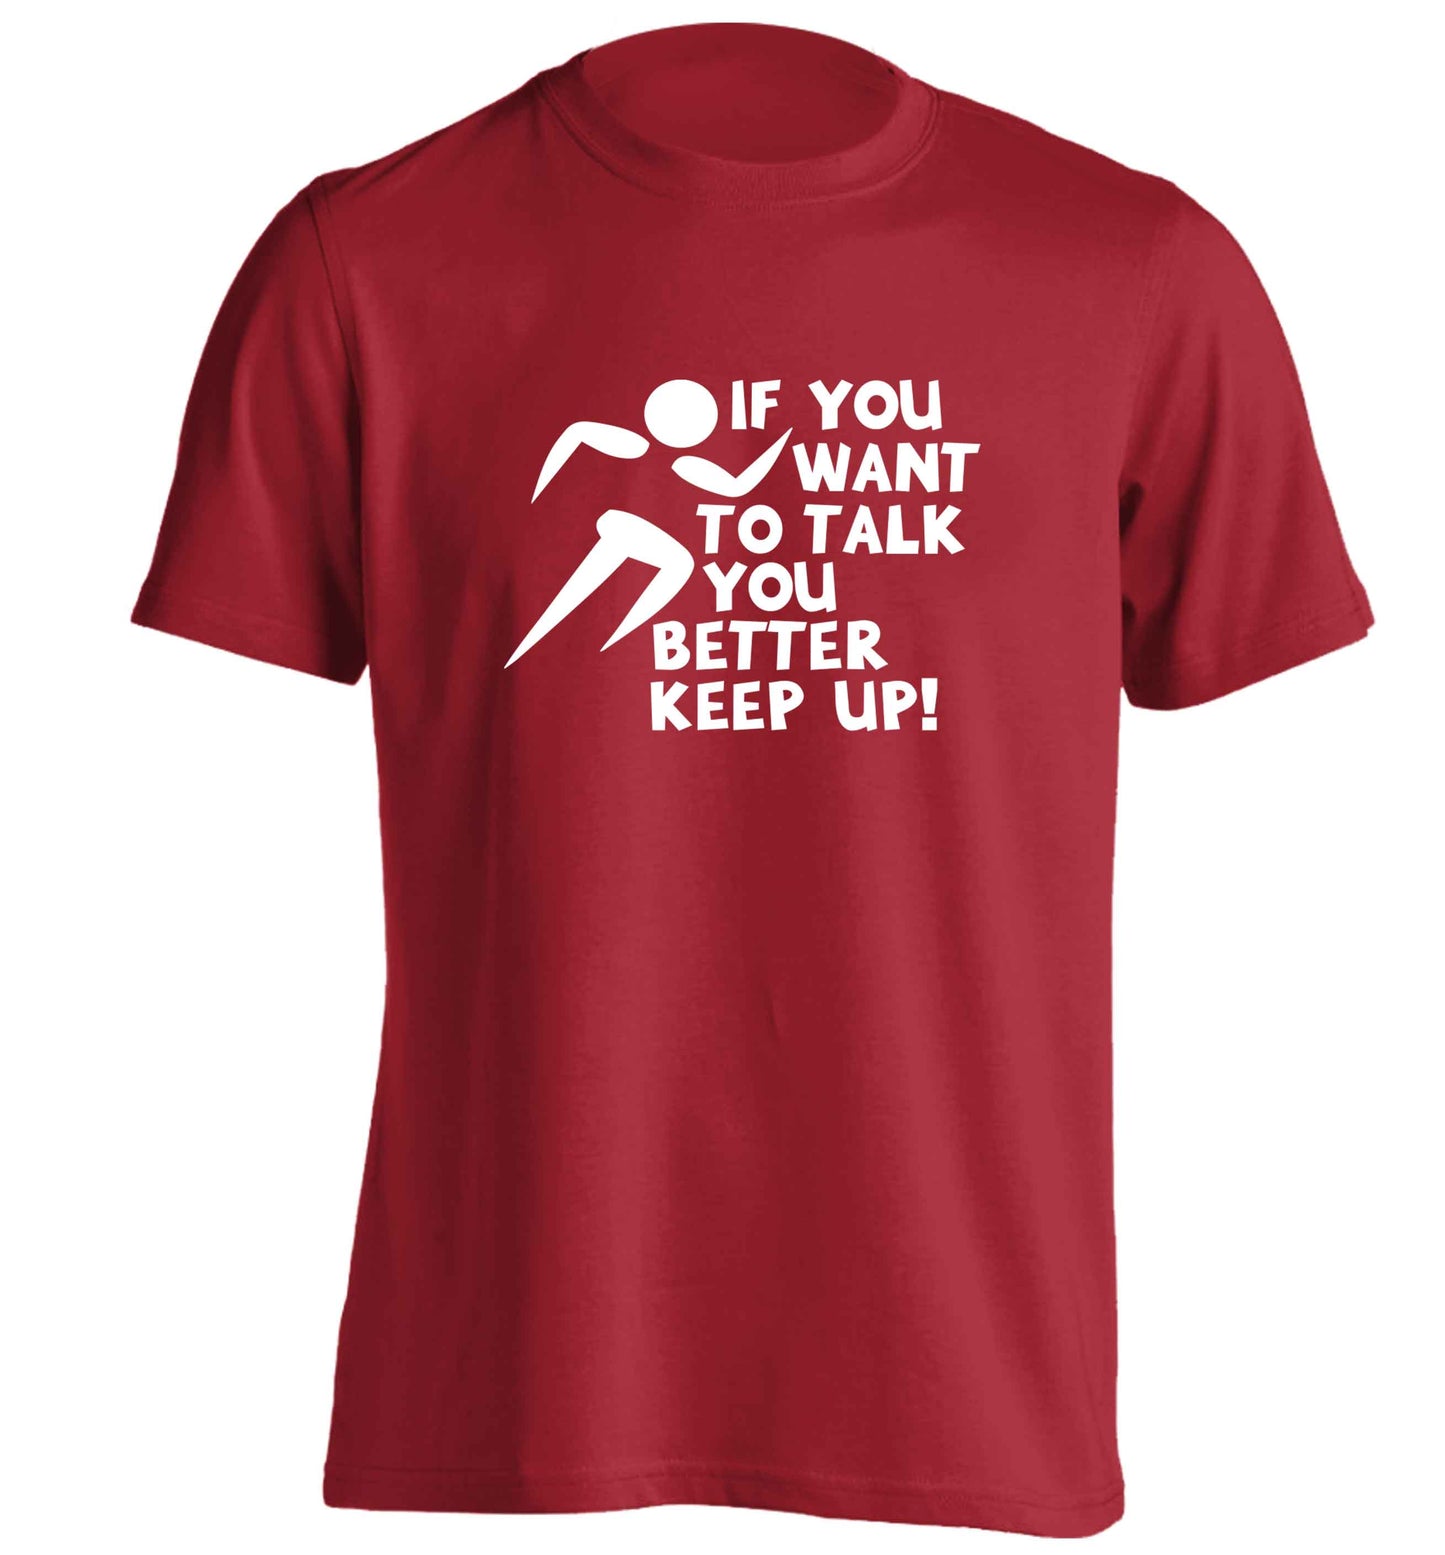 If you want to talk you better keep up! adults unisex red Tshirt 2XL